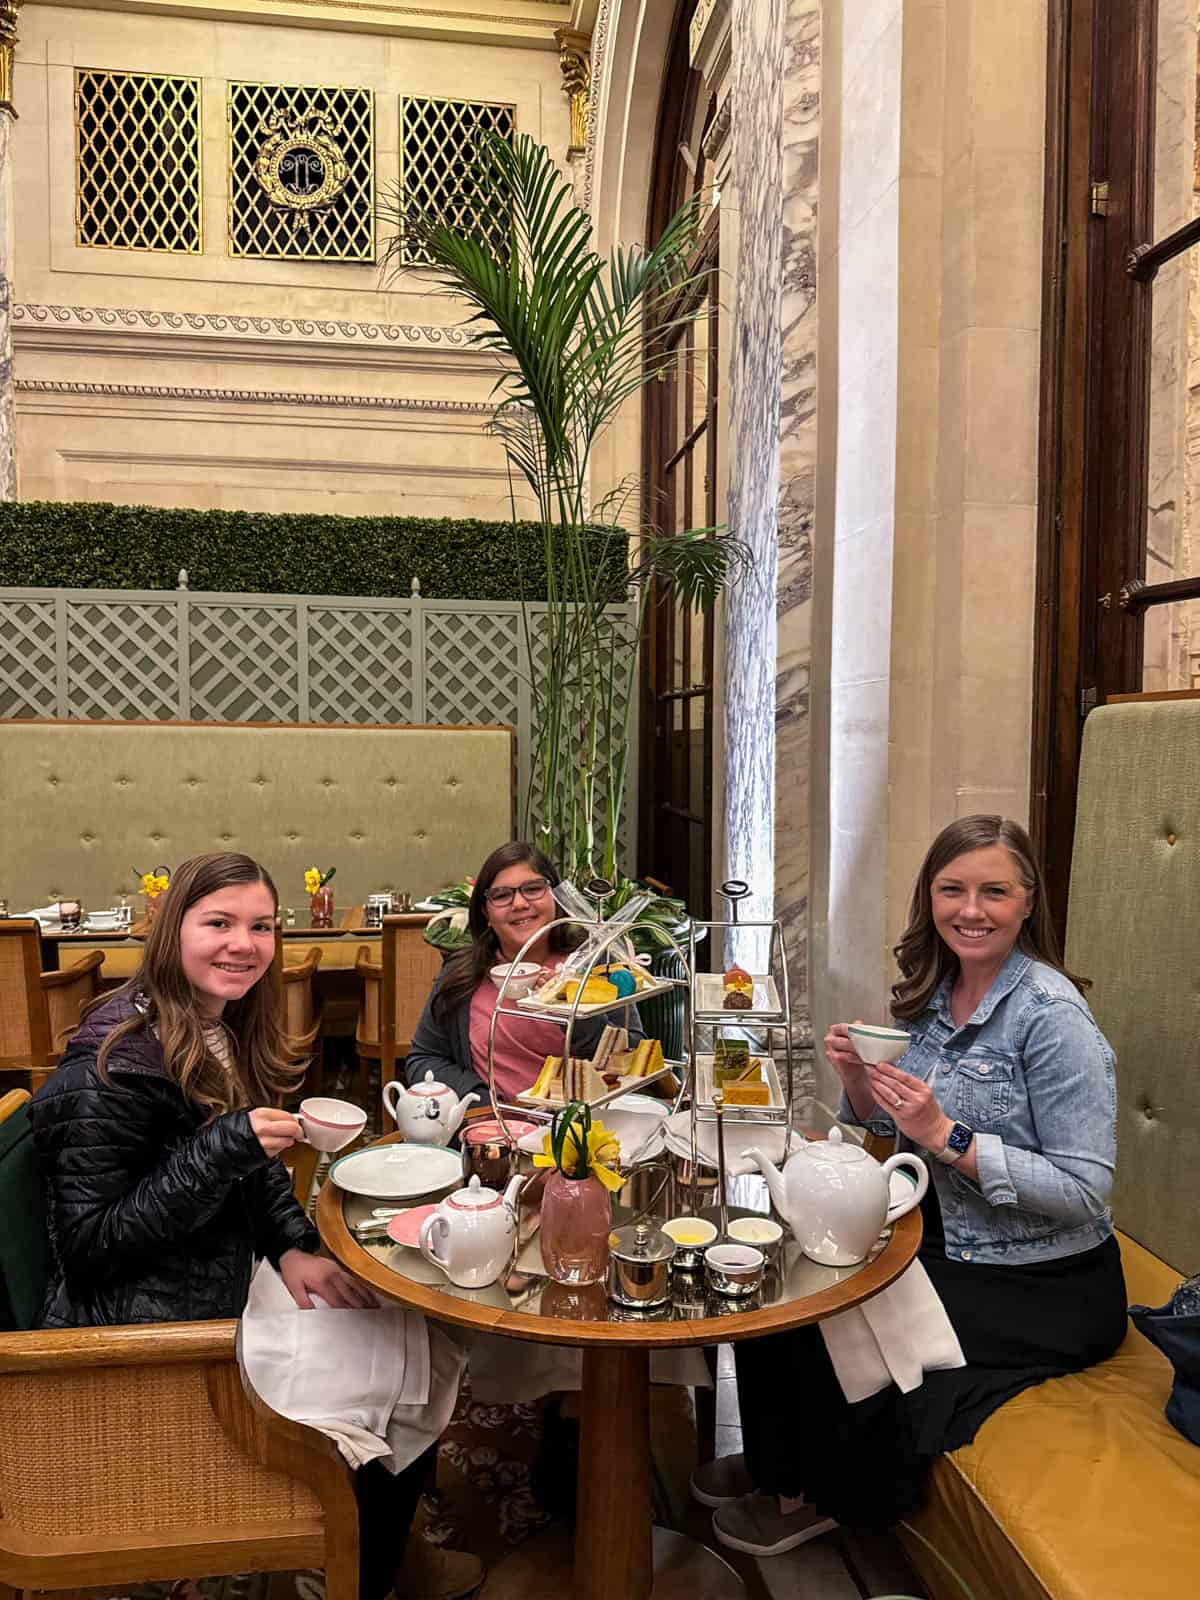 A mom and two young daughters having tea at the Plaza Hotel in NYC.